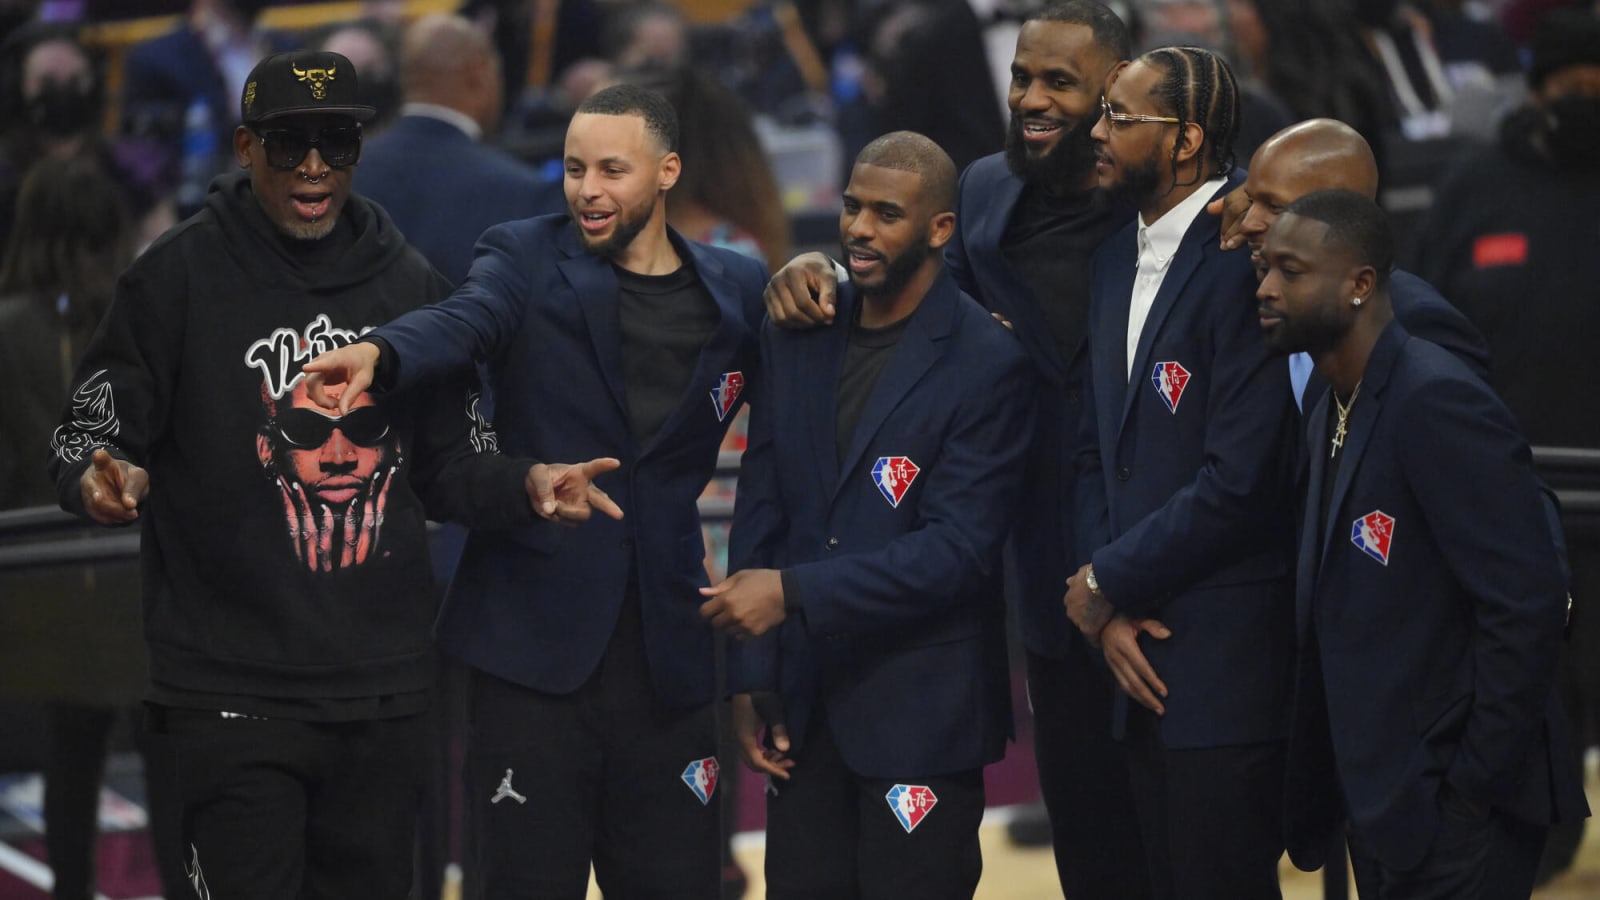 Carmelo Anthony recalls exact moment he knew Stephen Curry was going to be an all-time great 